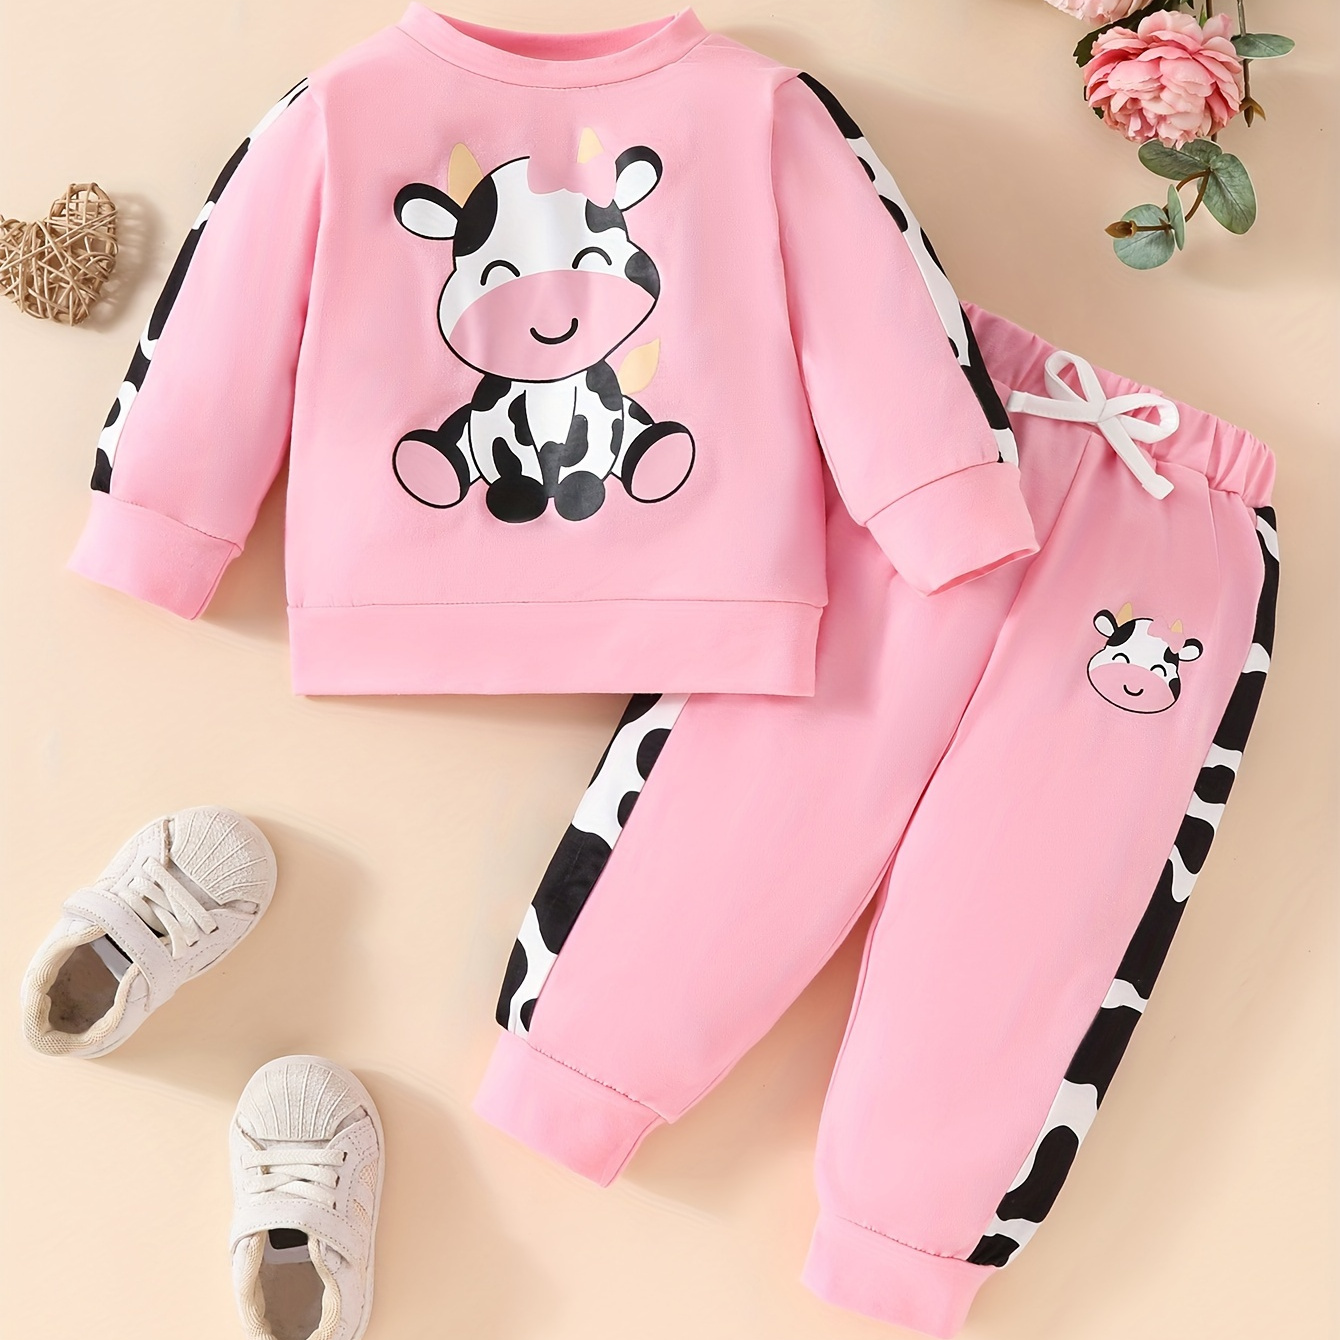 

2pcs Baby's Adorable Happy Cow Print Sweatshirt & Casual Sporty Style Pants Set, Toddler & Infant Girl's Clothes For Fall Spring